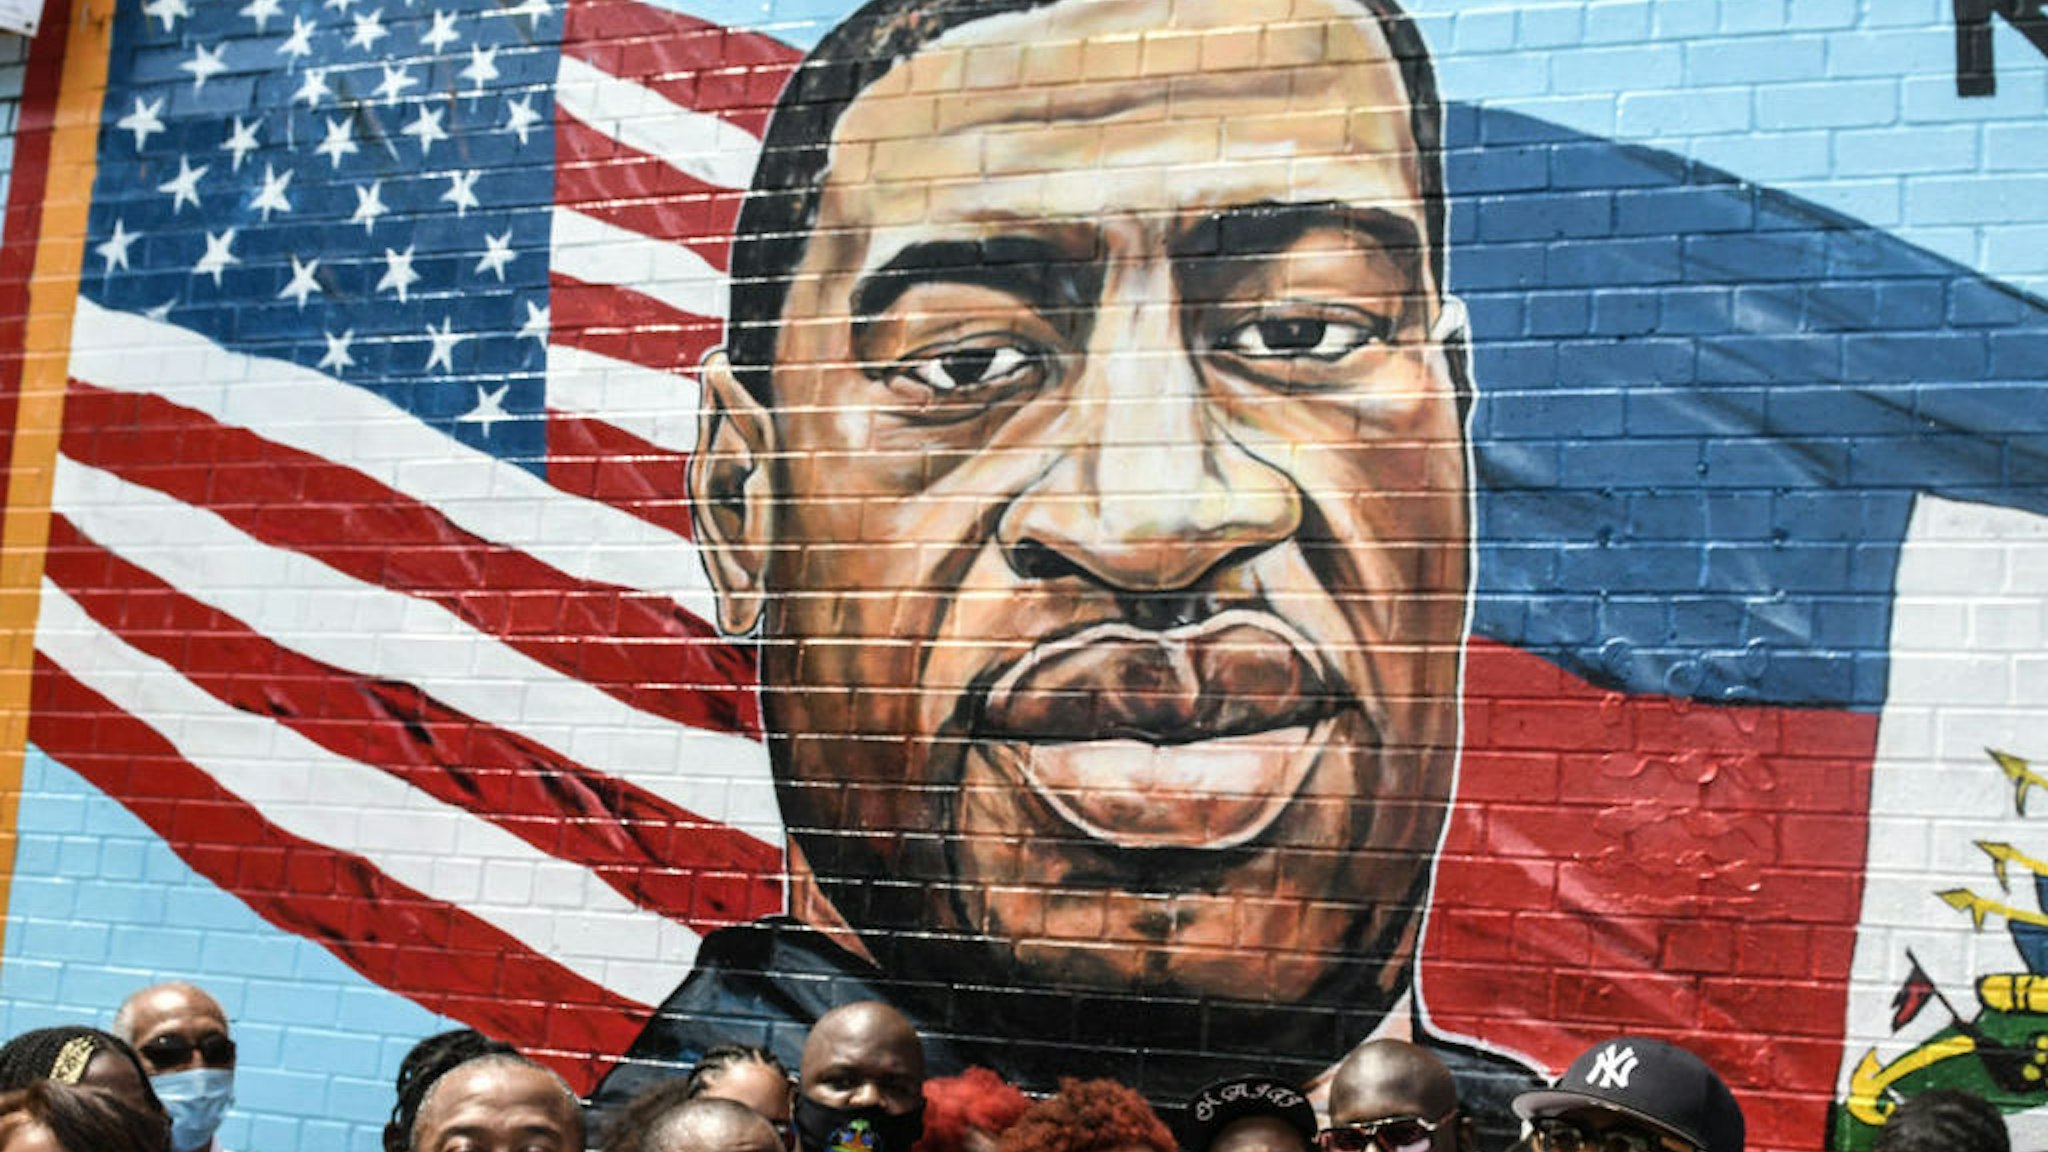 NEW YORK, NY - JULY 13: Terrance Floyd (R), the brother of George Floyd, attends a unveiling of a mural painted by artist Kenny Altidor depicting George Floyd on a sidewall of CTown Supermarket on July 13, 2020 in the Brooklyn borough New York City. George Floyd was killed by a white police officer in Minneapolis and his death has sparked a national reckoning about race and policing in the United States. (Photo by Stephanie Keith/Getty Images)